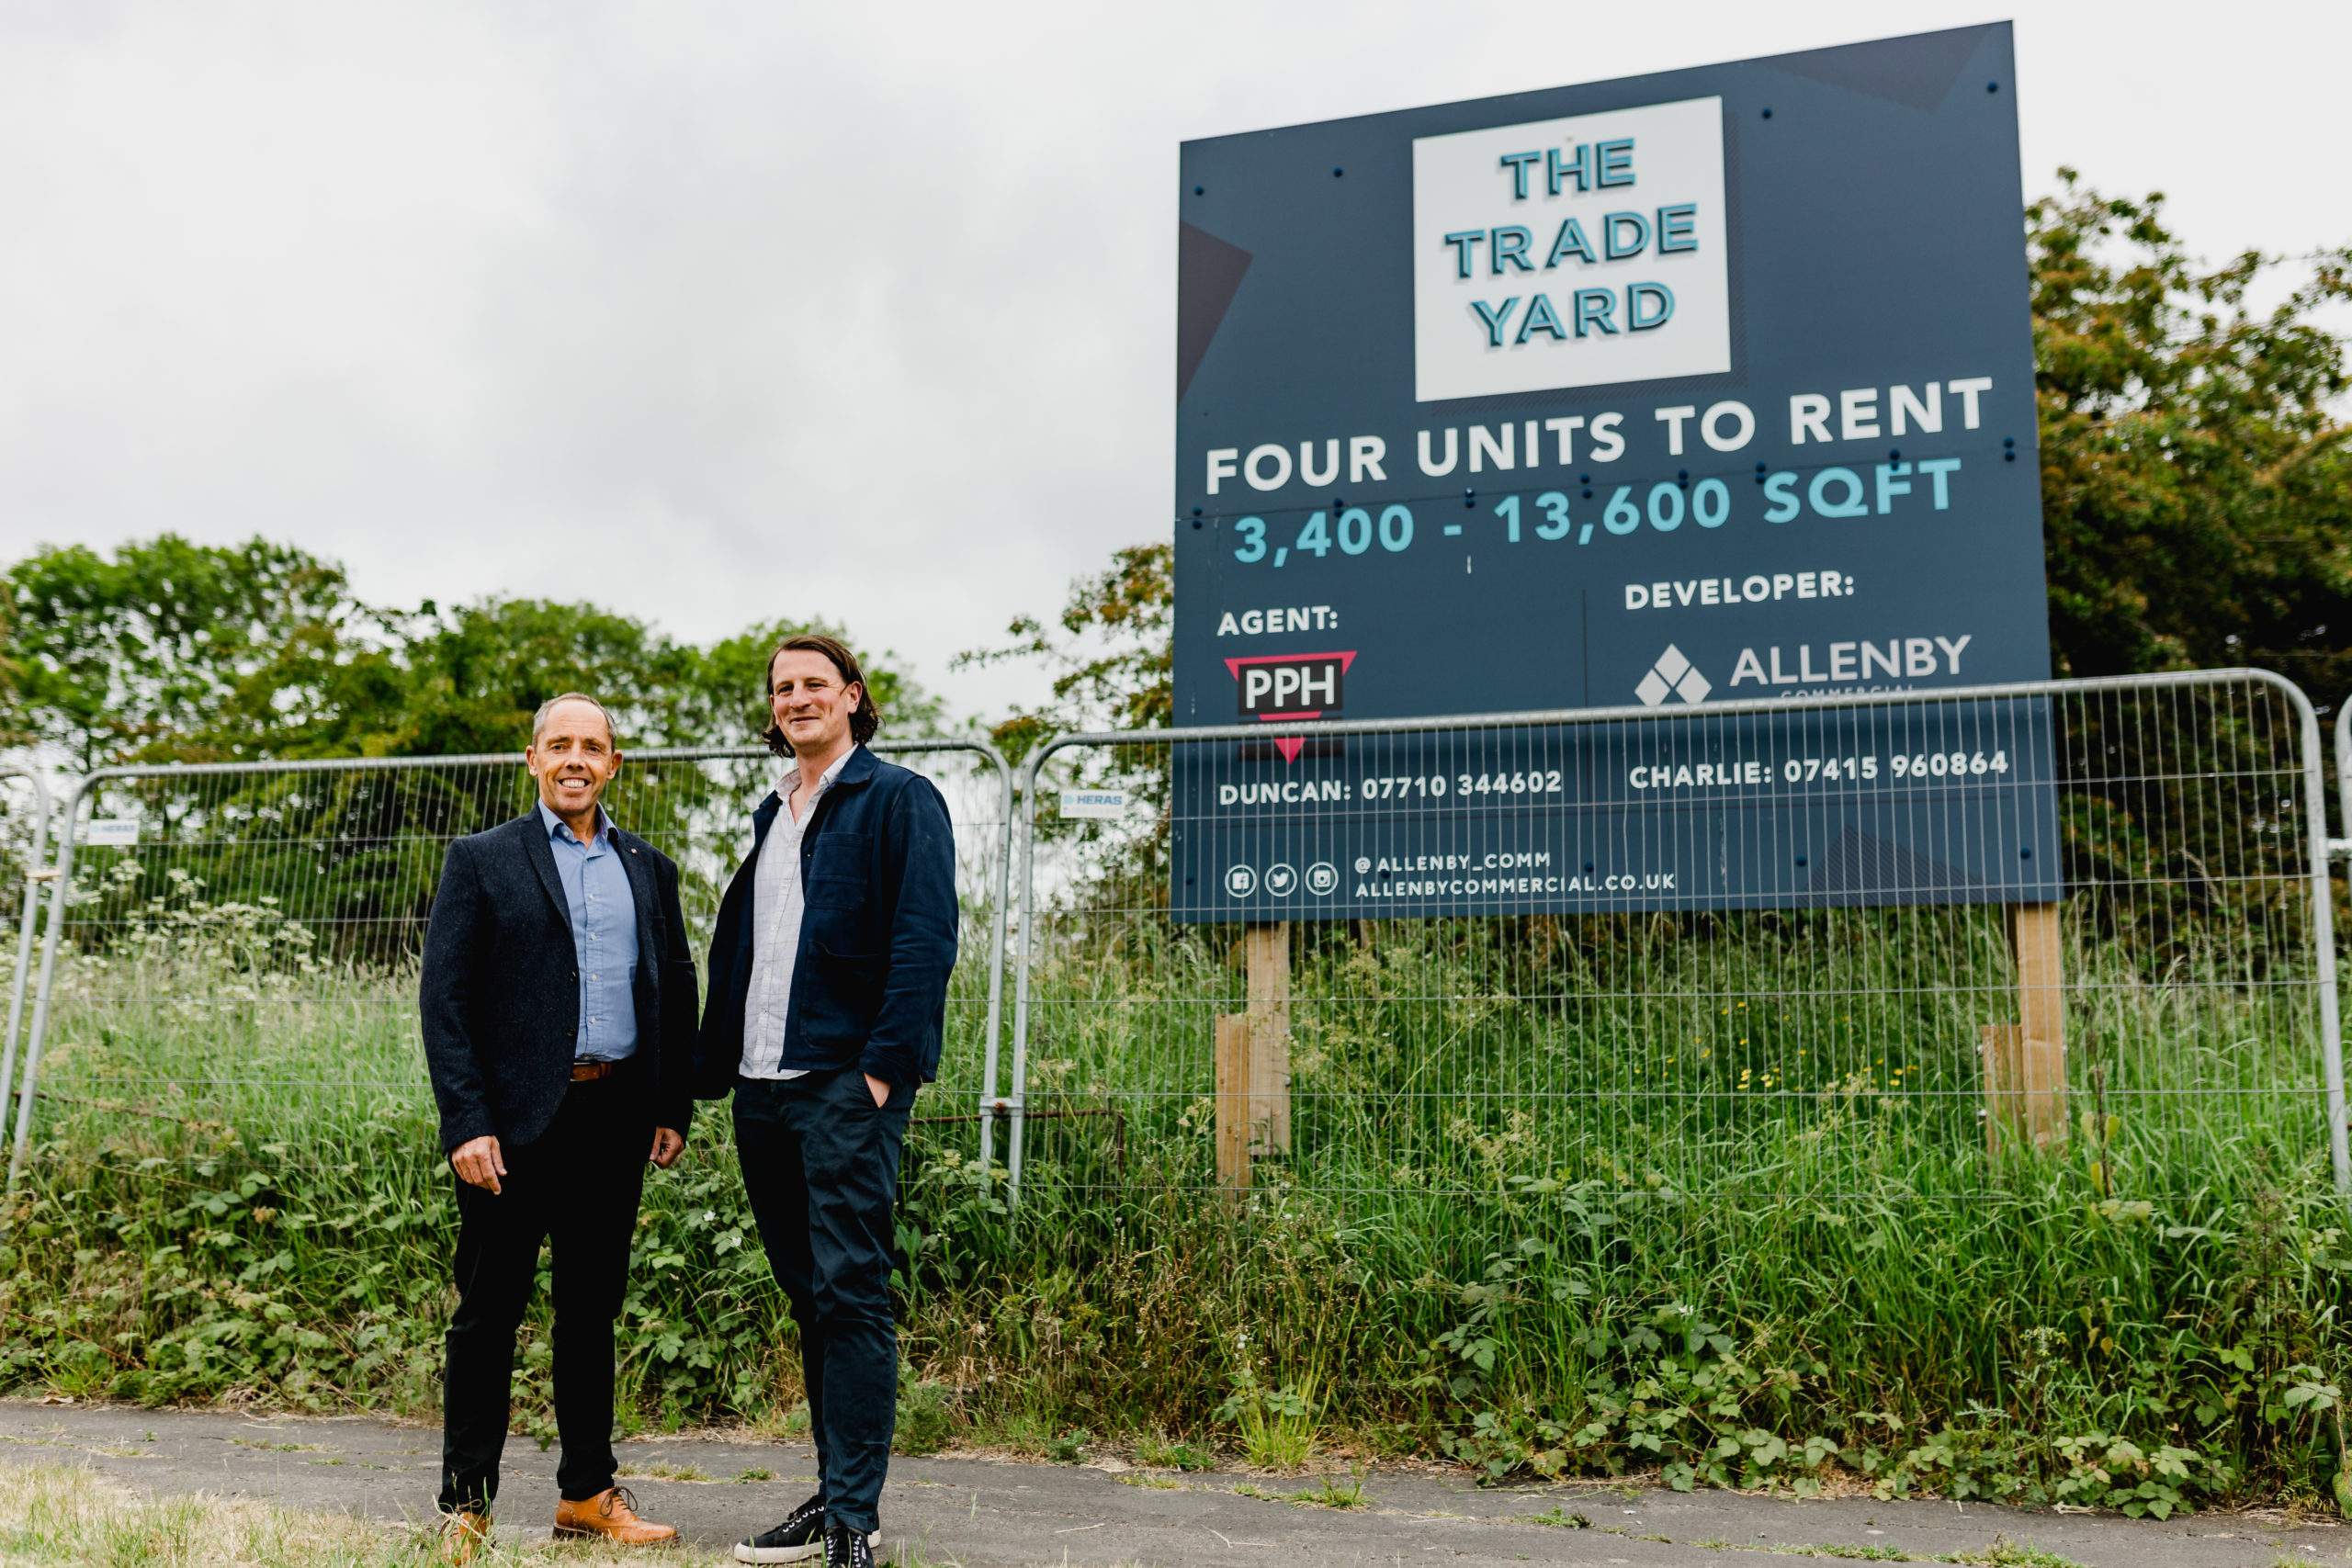 Allenby Commercial expands The Trade Yard network to Barton on Humber